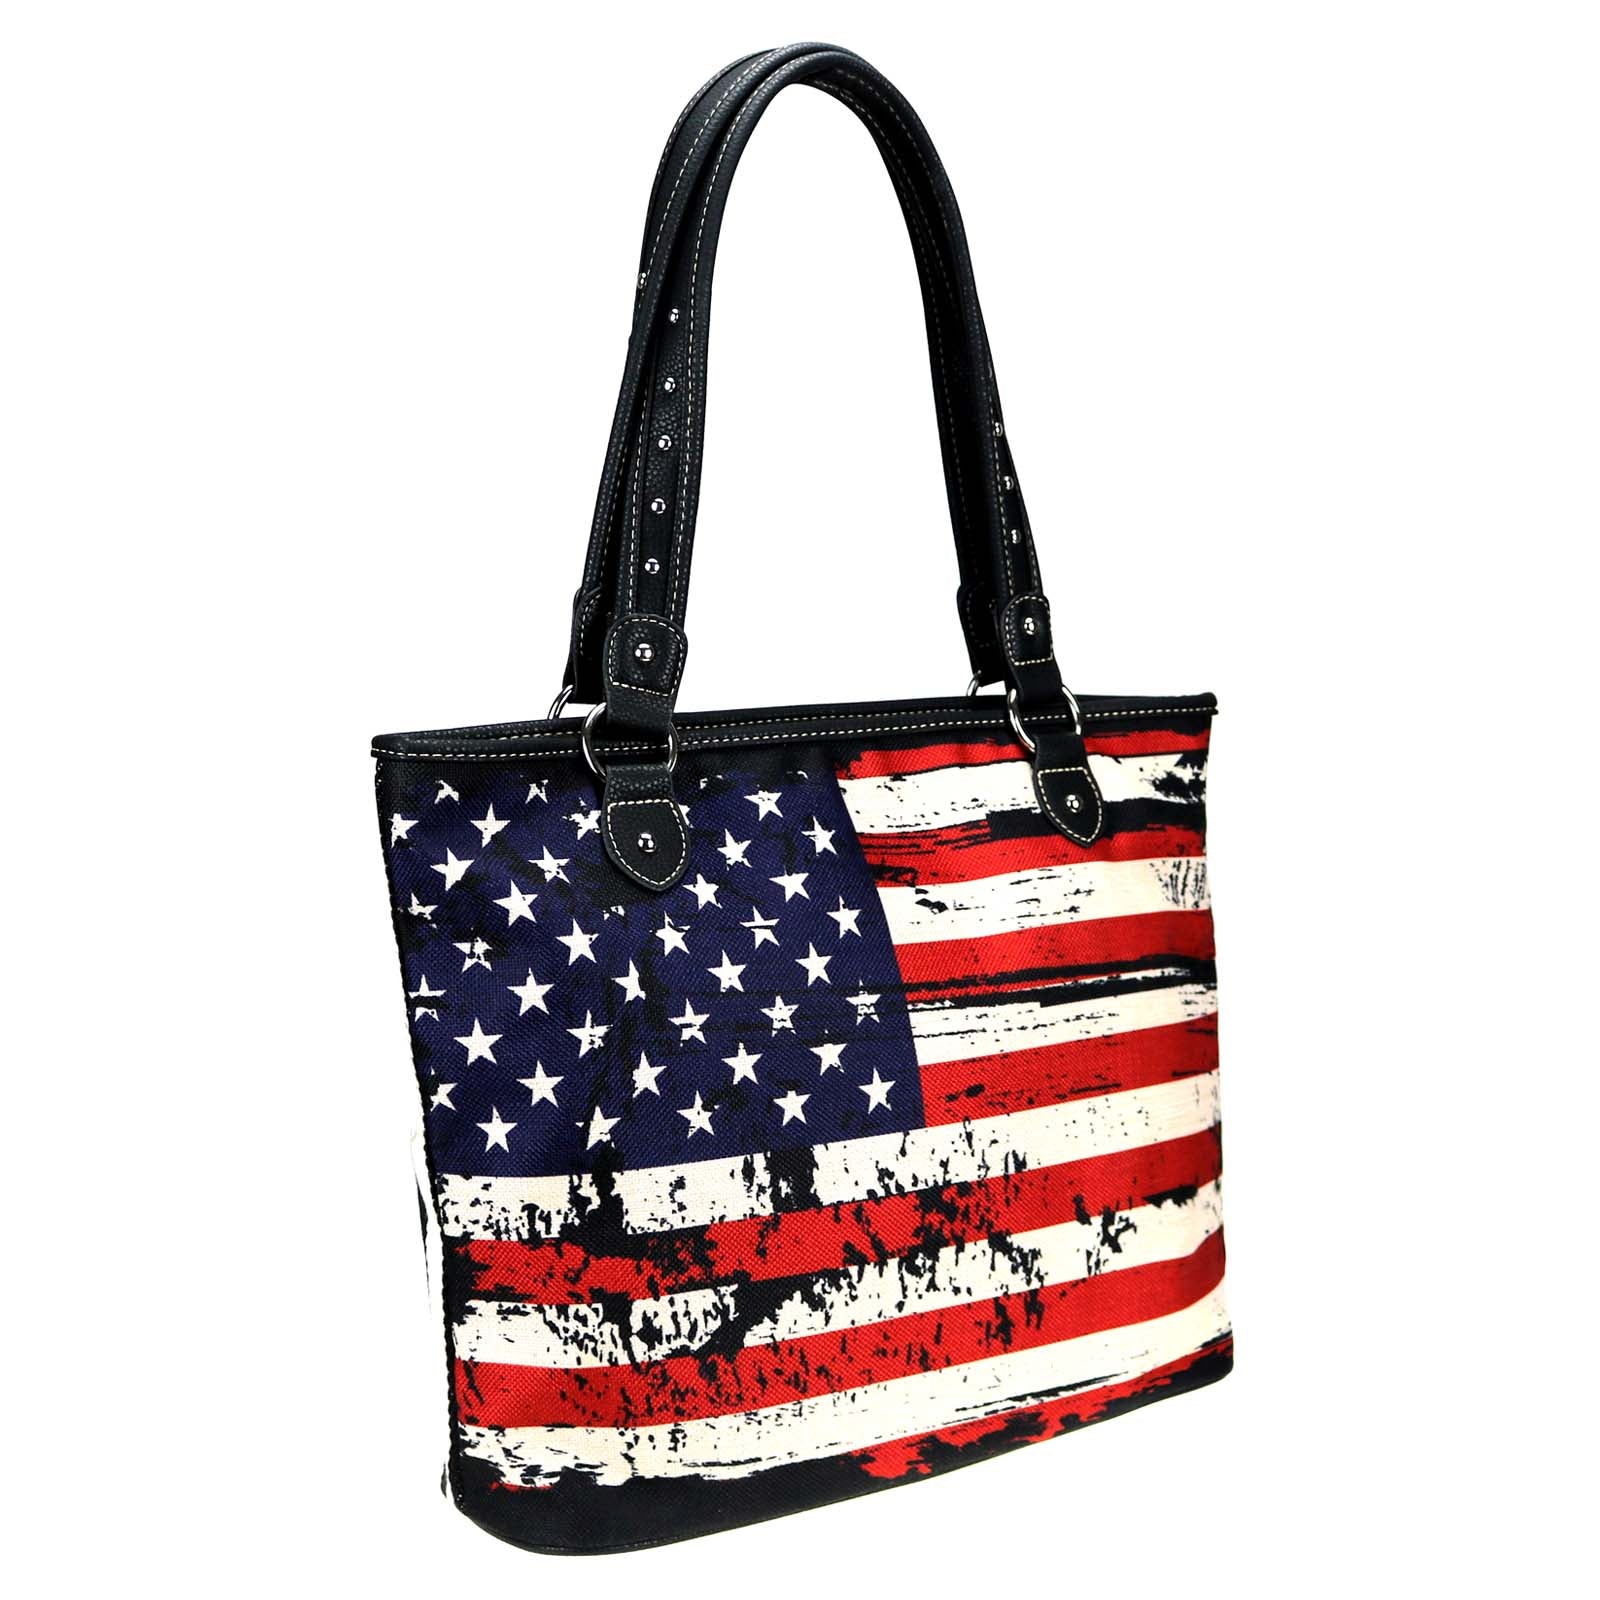 Montana West American Flag Canvas Tote Bag - Cowgirl Wear